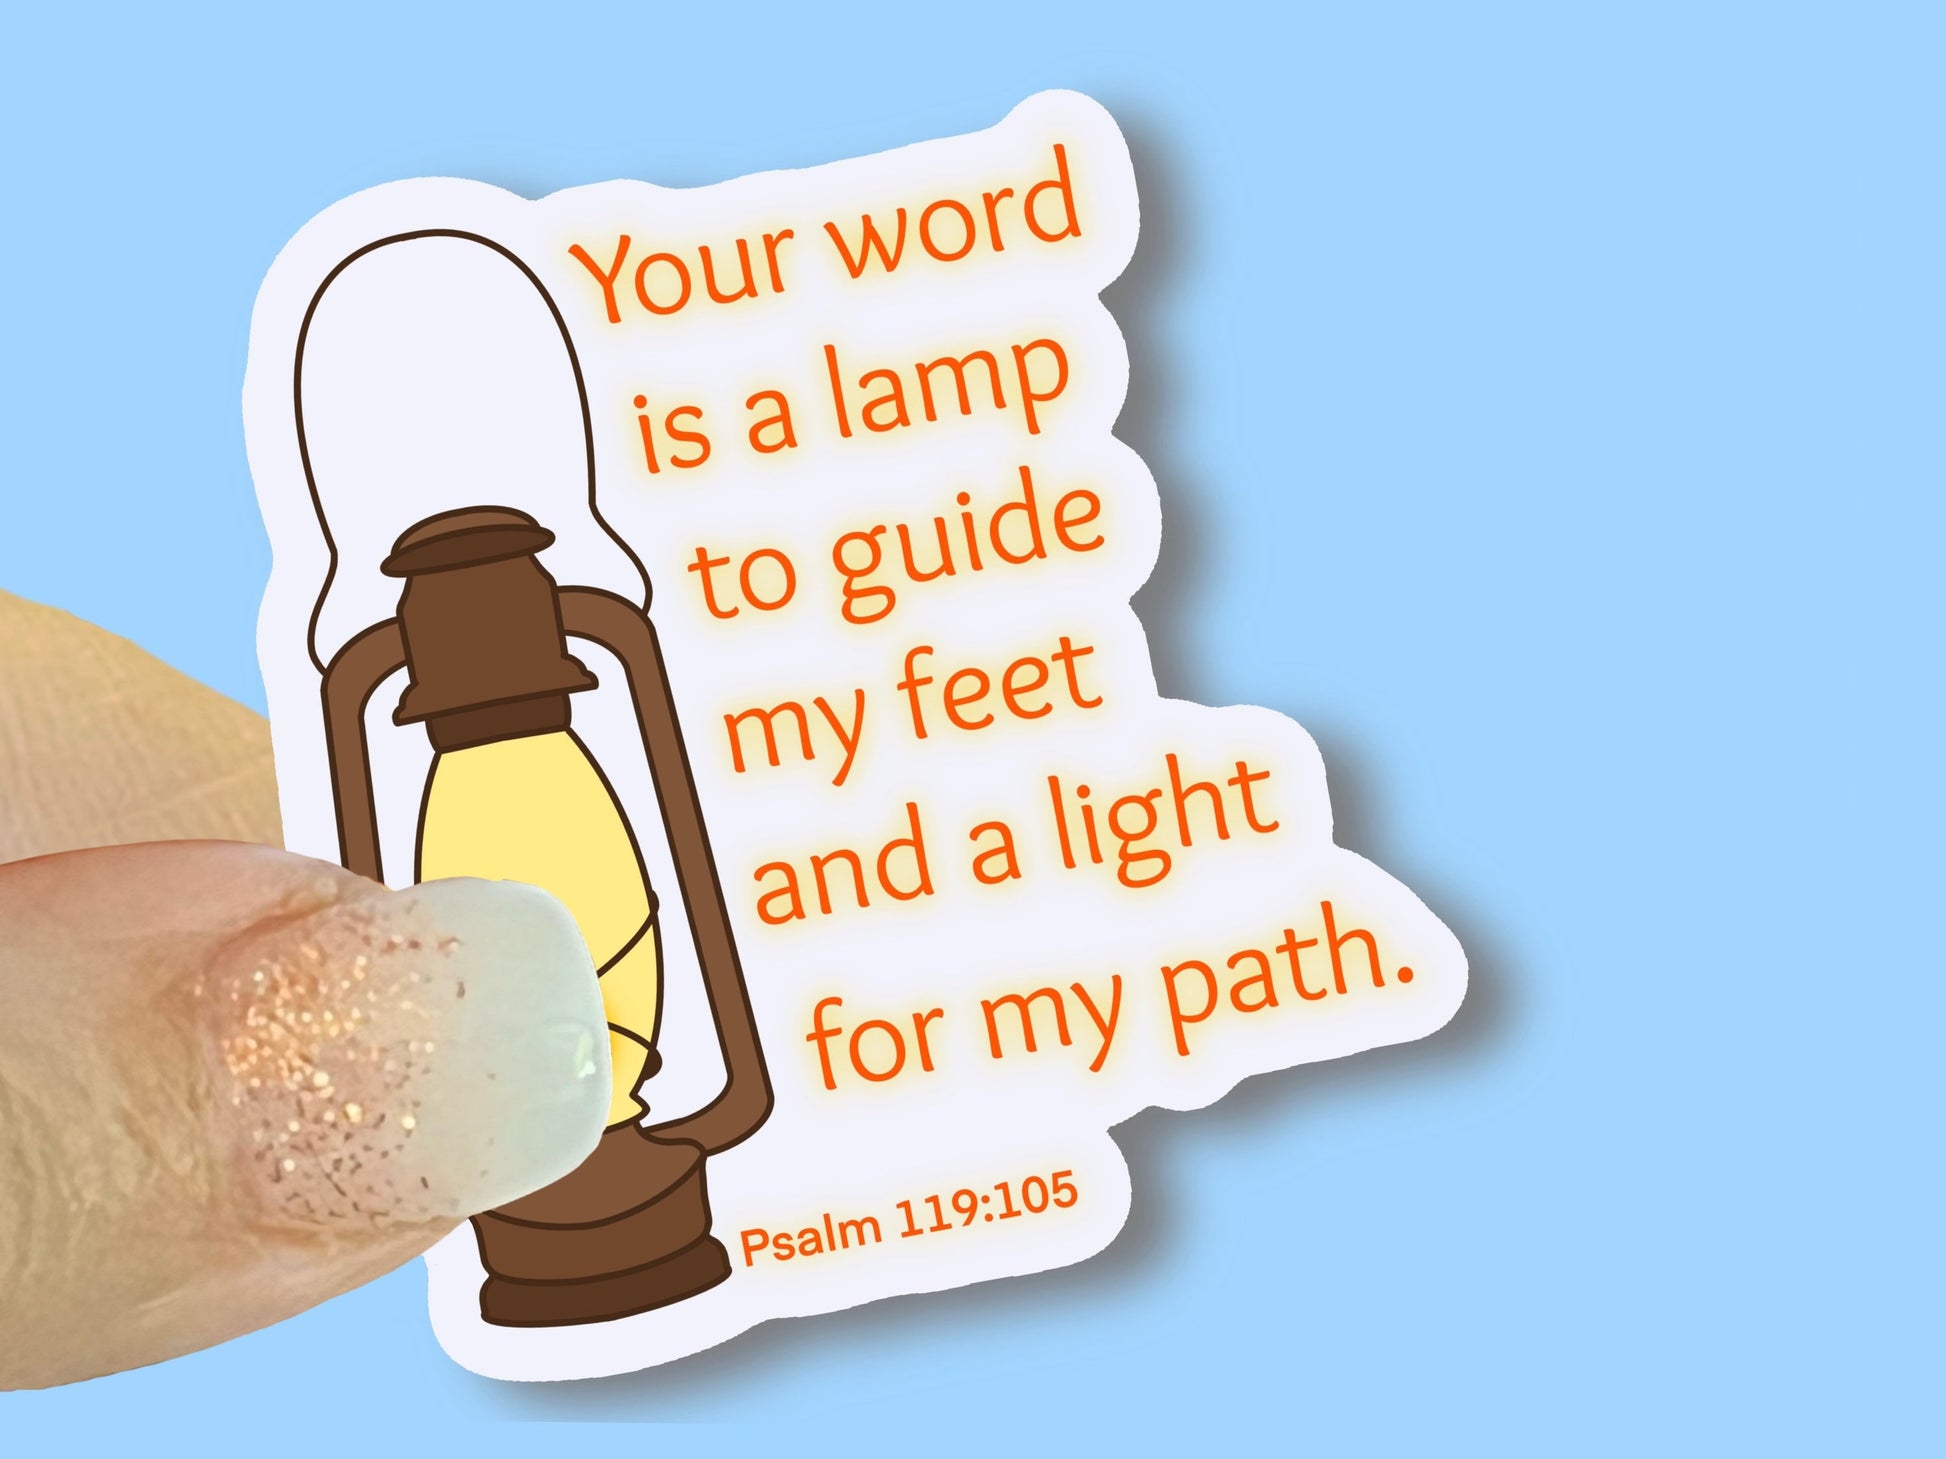 Your word is a lamp to guide my feet and a light for my path, Psalm 119:105, Christian Faith Waterproof Vinyl Sticker/ Decal- Choice of Size